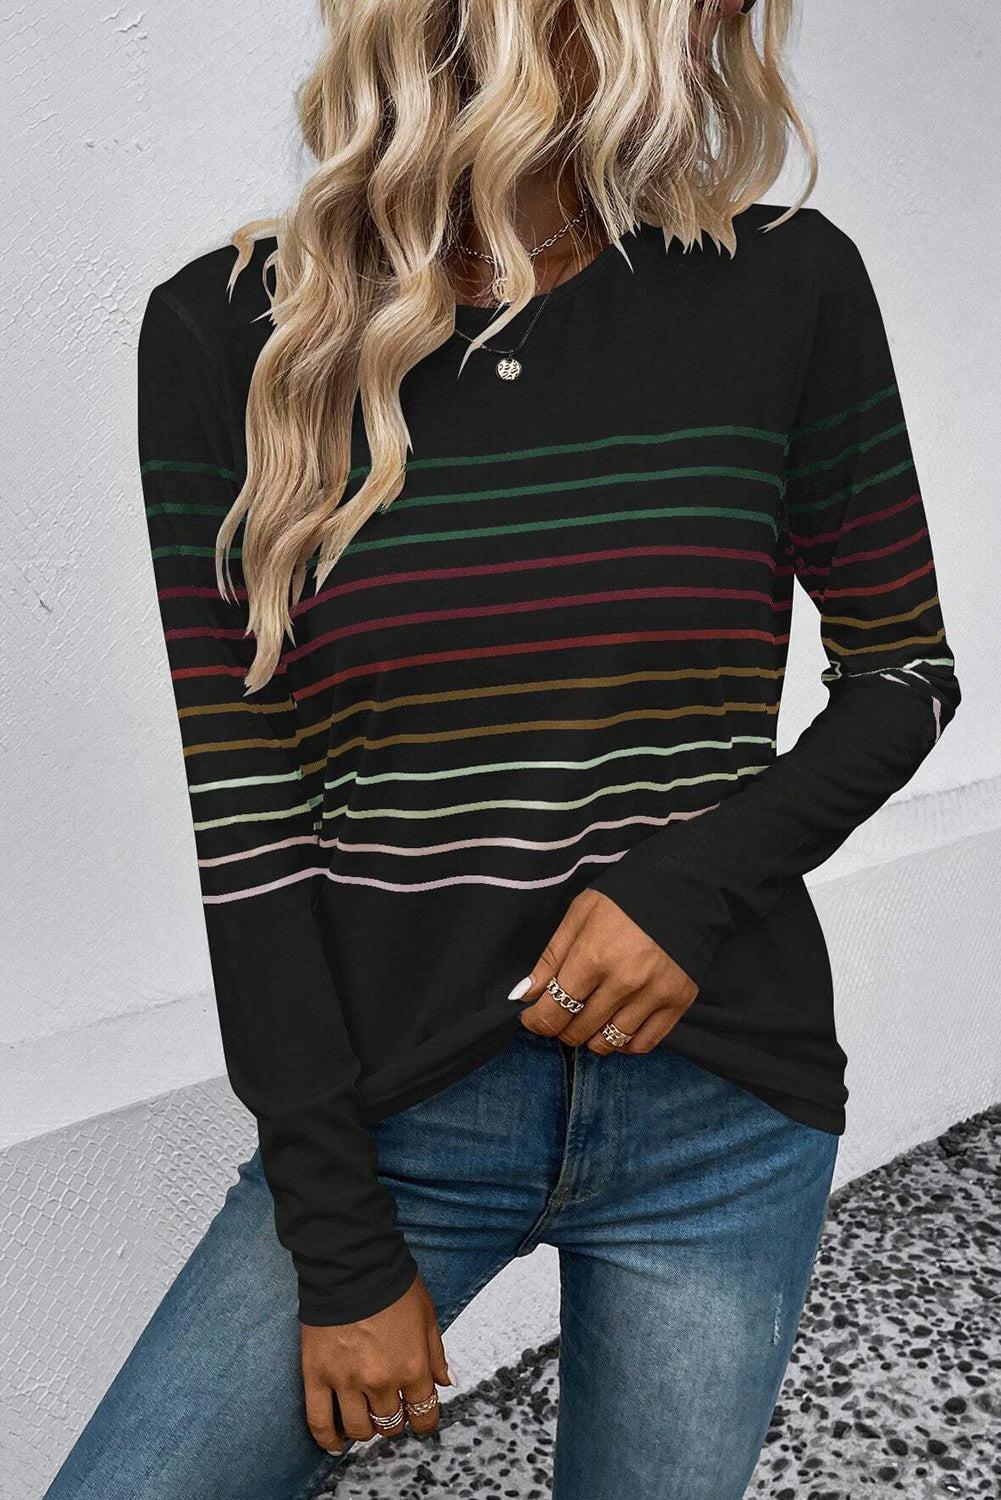 a woman with blonde hair wearing a black striped top